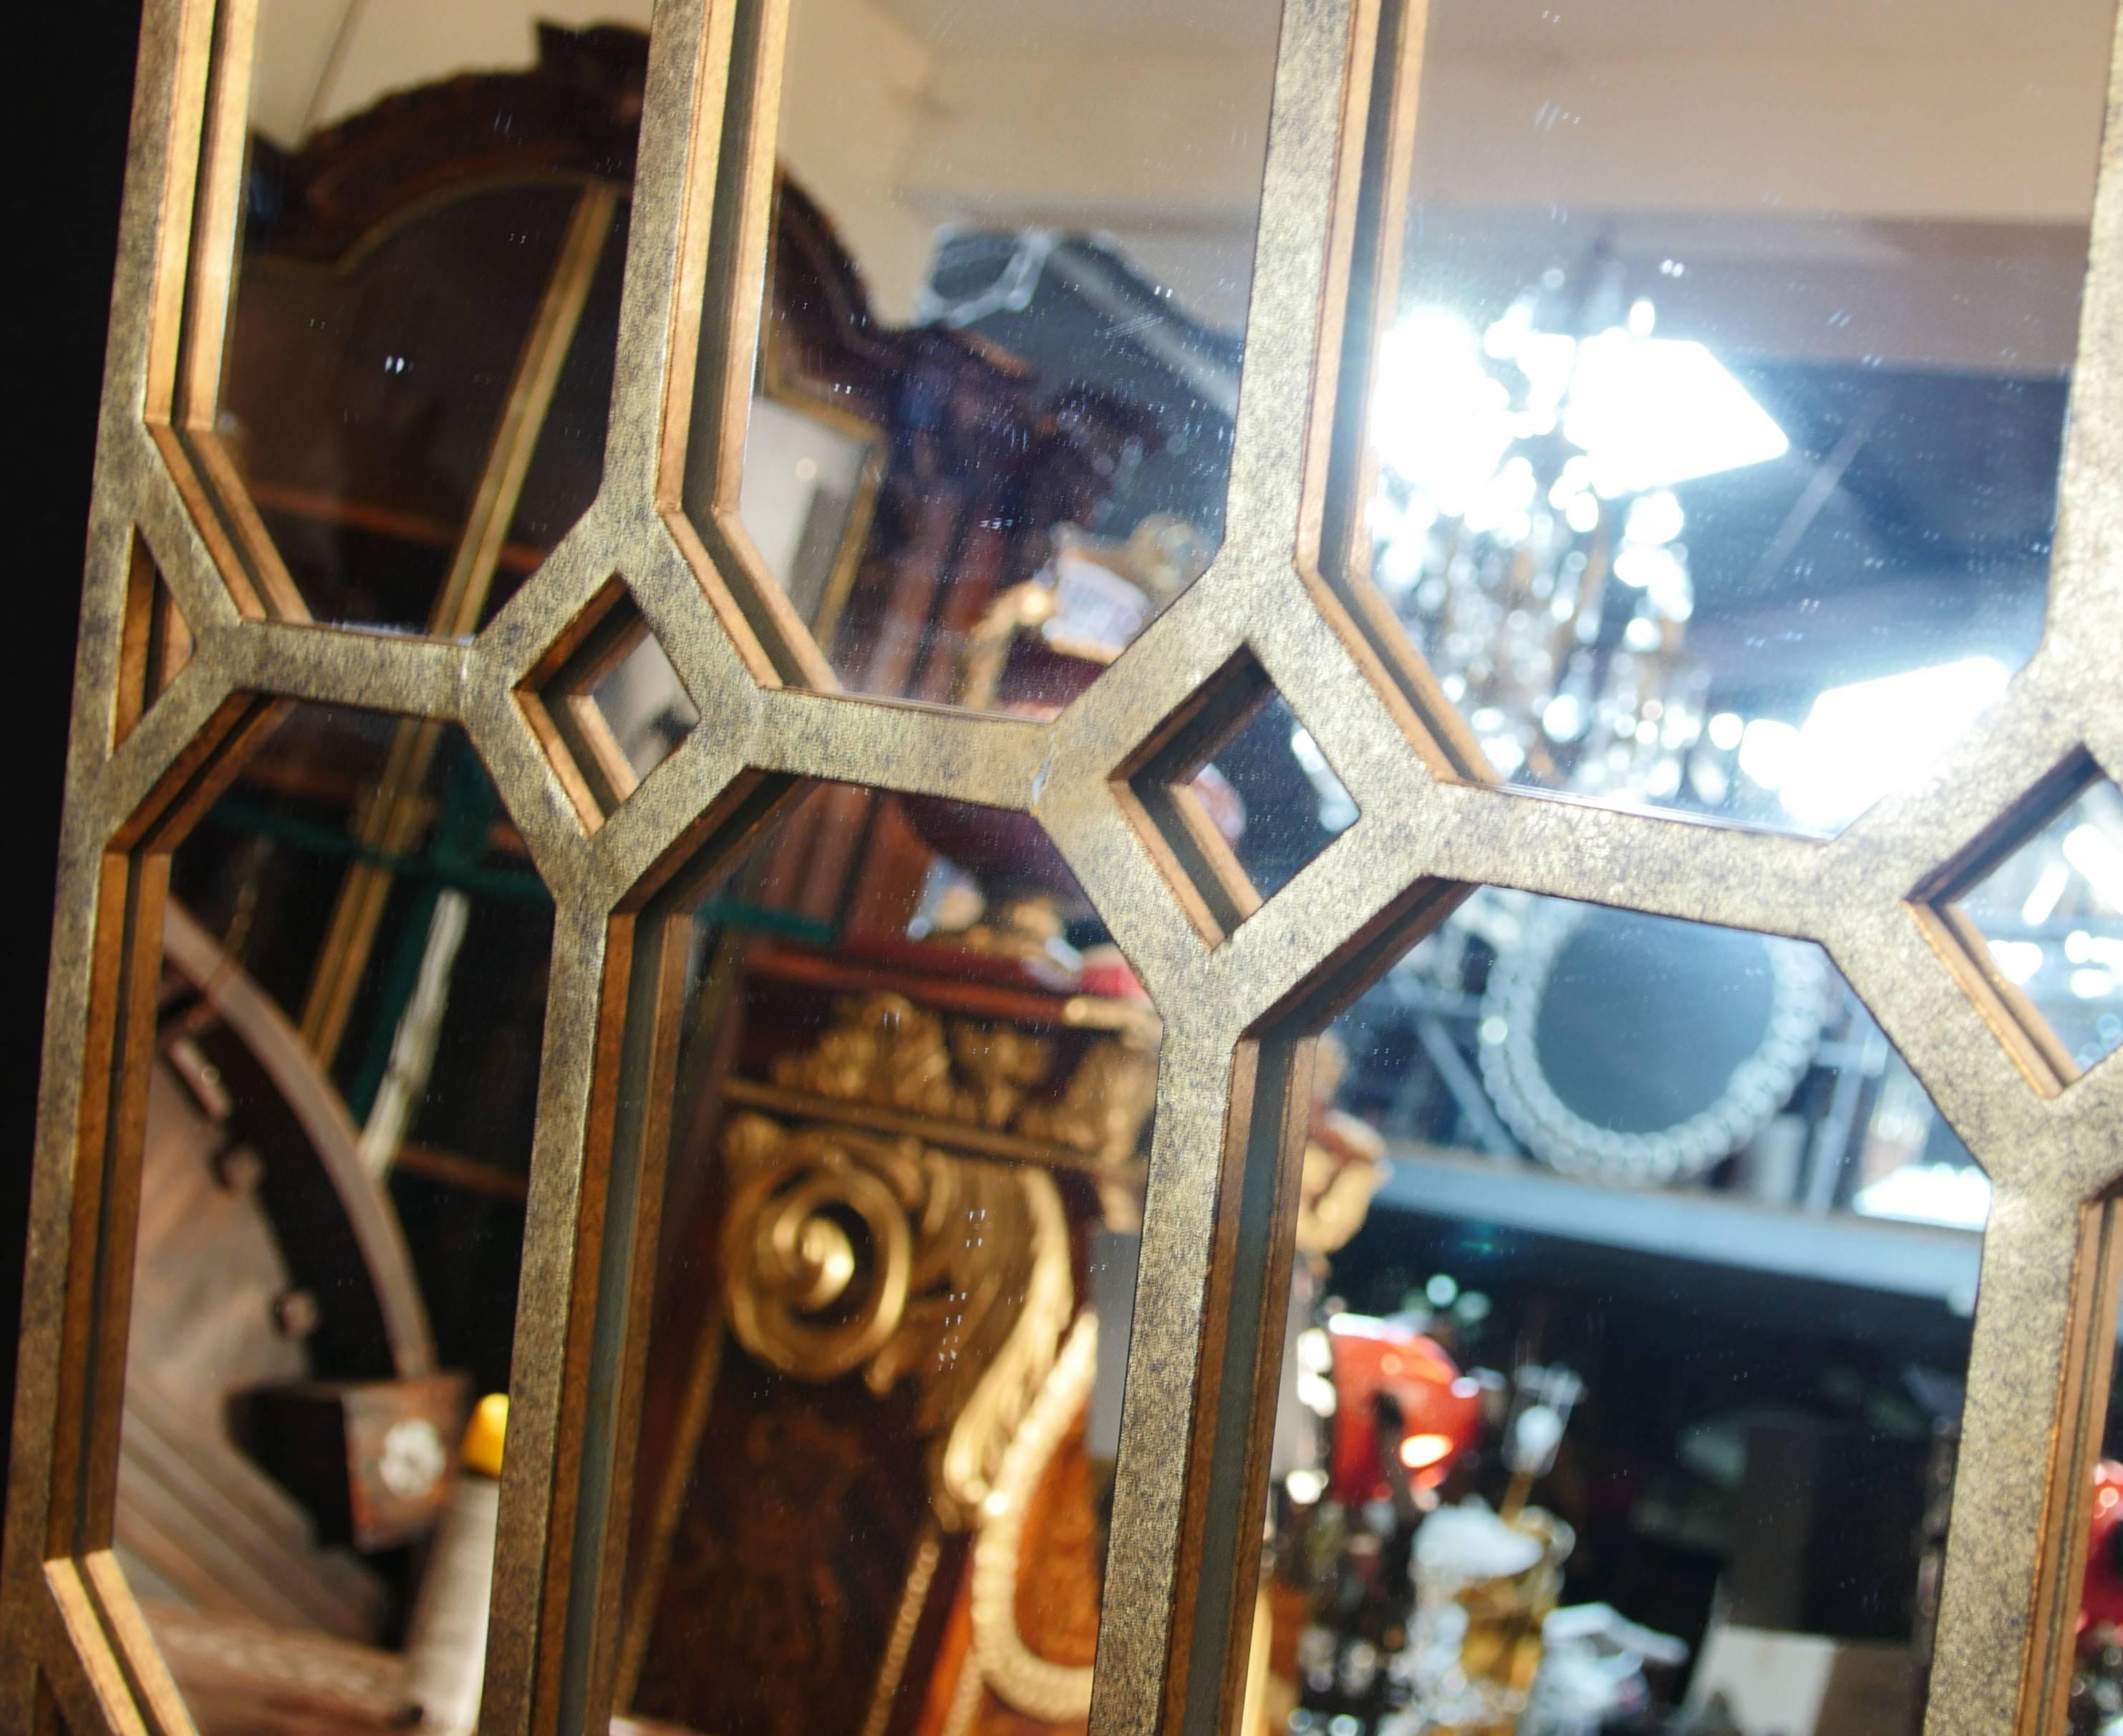 Stunning antique French gilt pier mirror. 
Great architectural mirror as the piece is in the form of a window.
Glass is clear and blemish free.
Purchased from a dealer on March Biron at Paris antiques markets.
Offered in great condition, ready